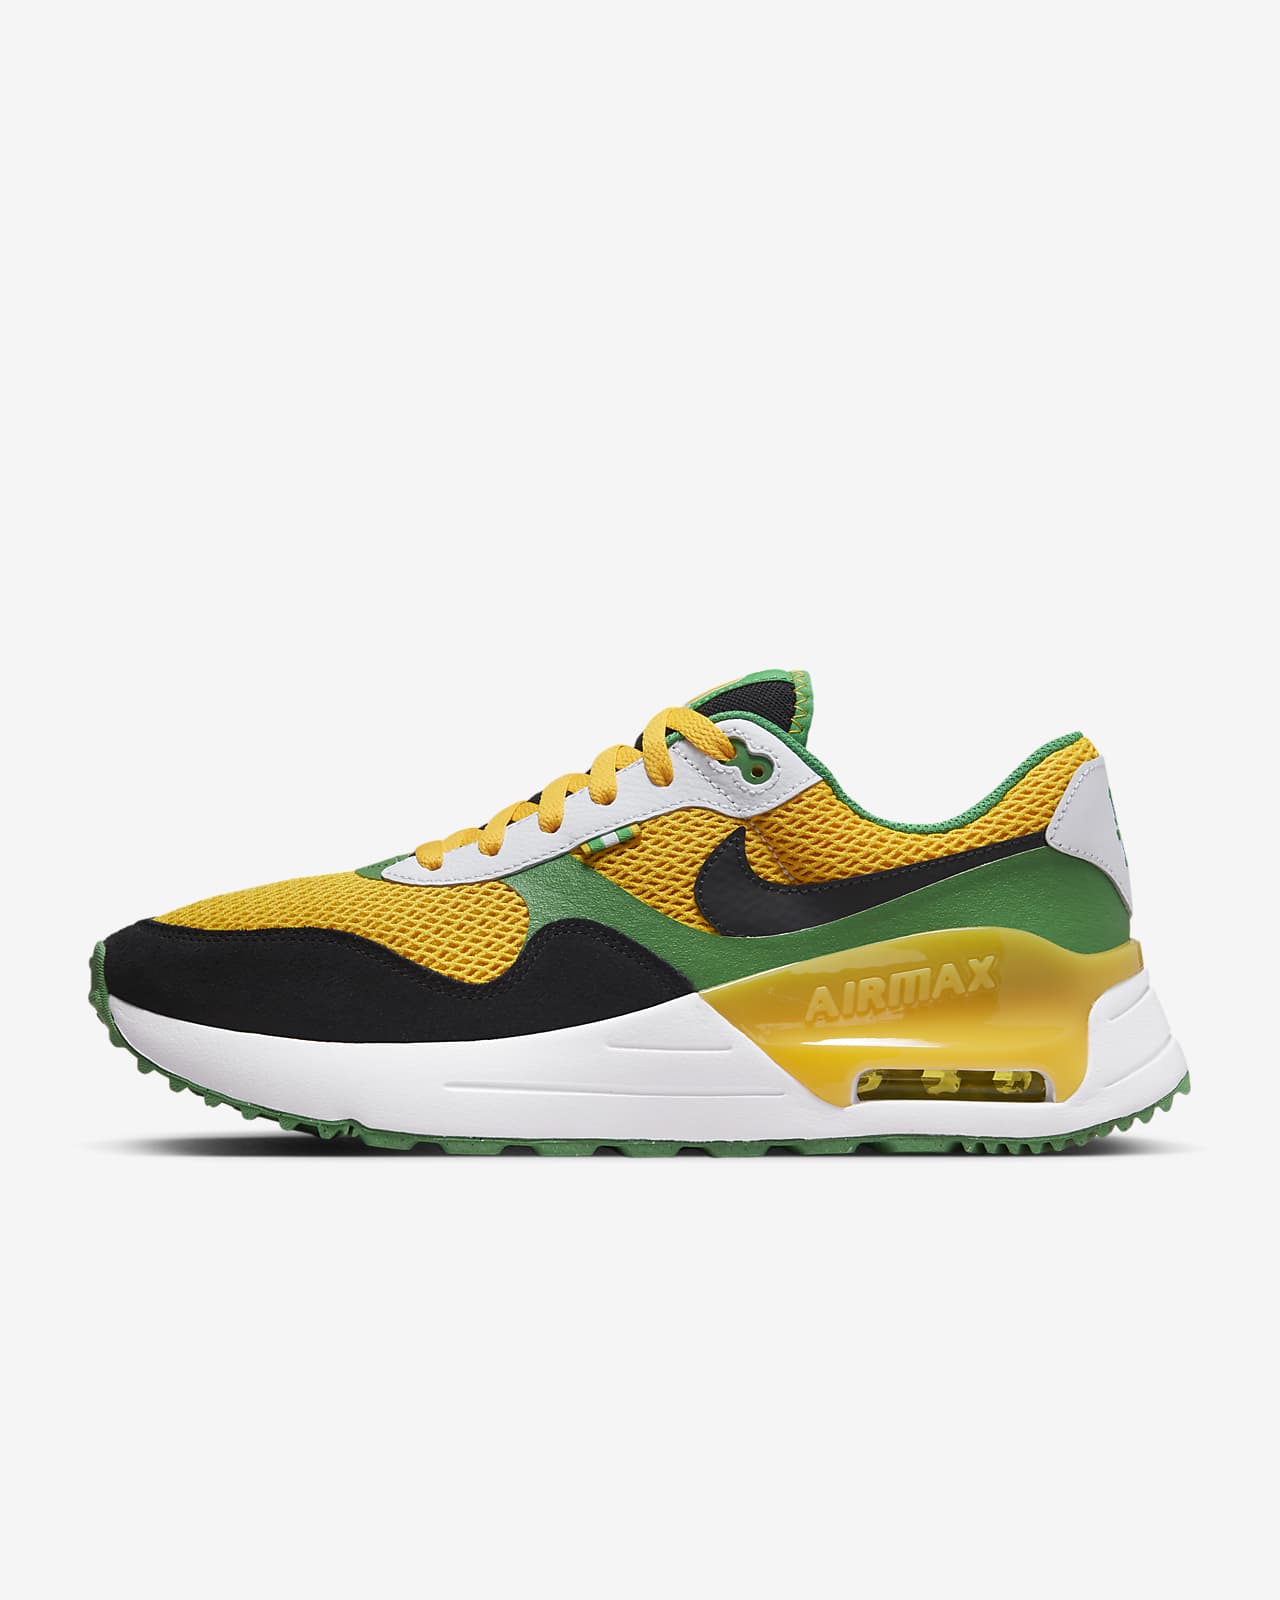 Nike College Air Max SYSTM (Oregon) Men's Shoes.